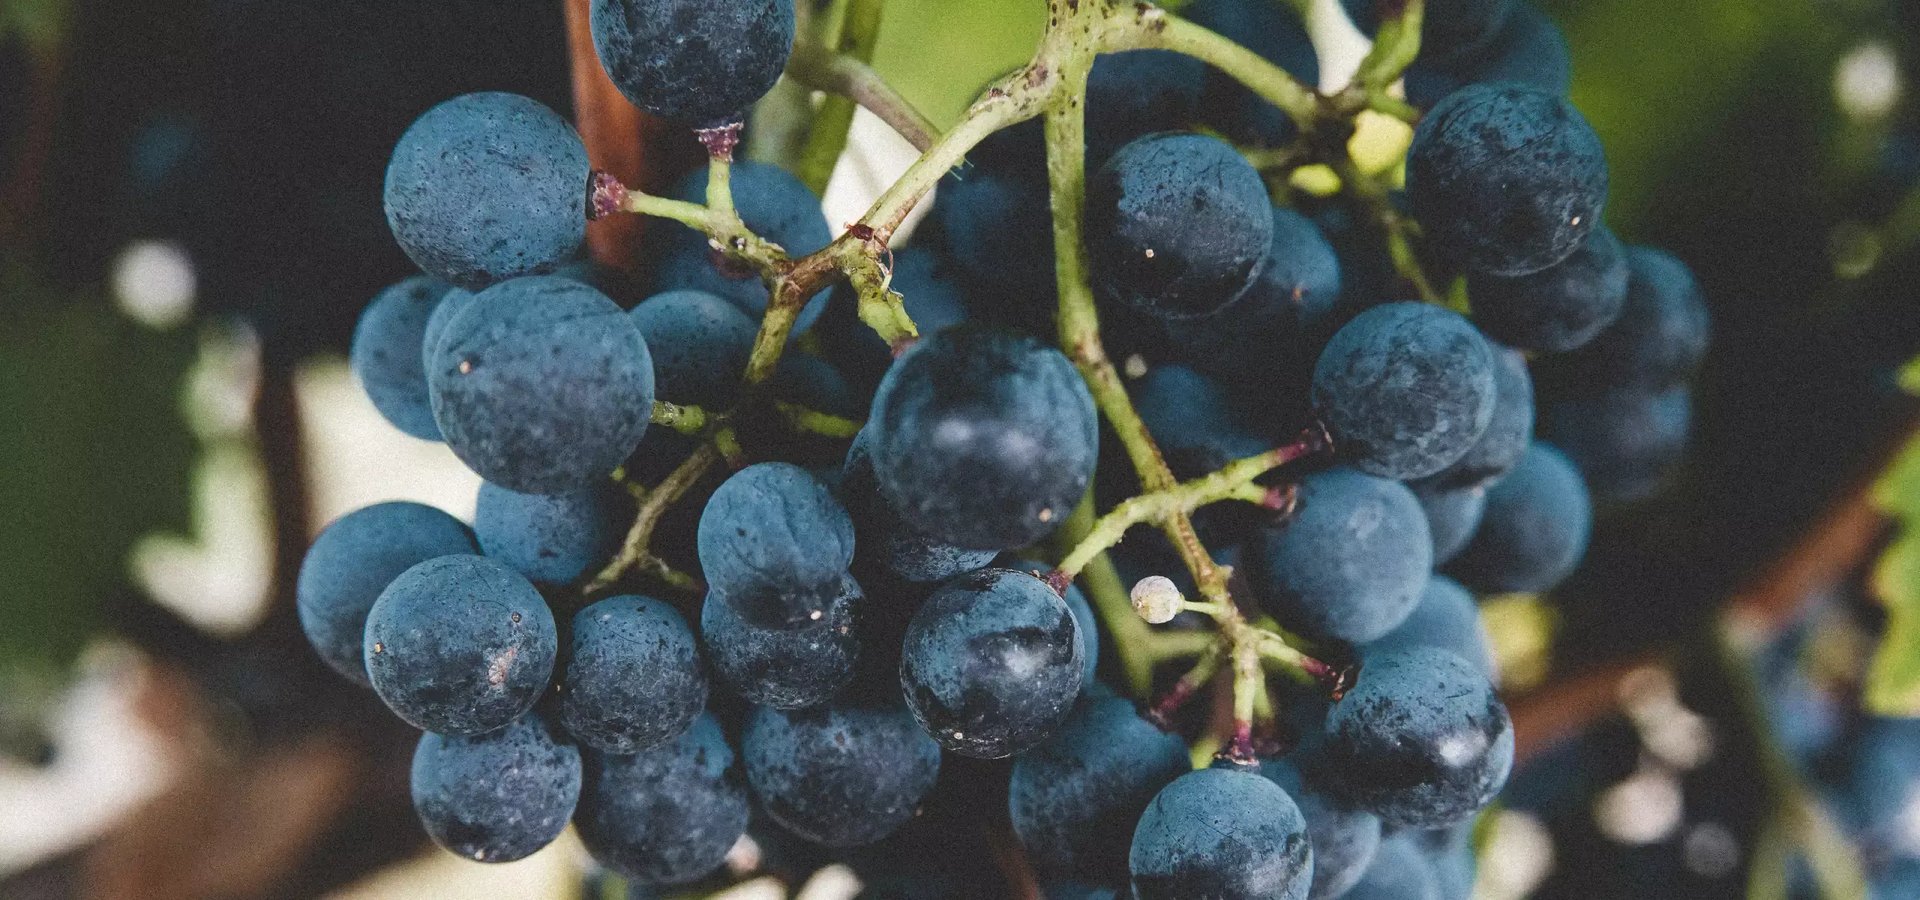 Close up image of dark grapes on the vine